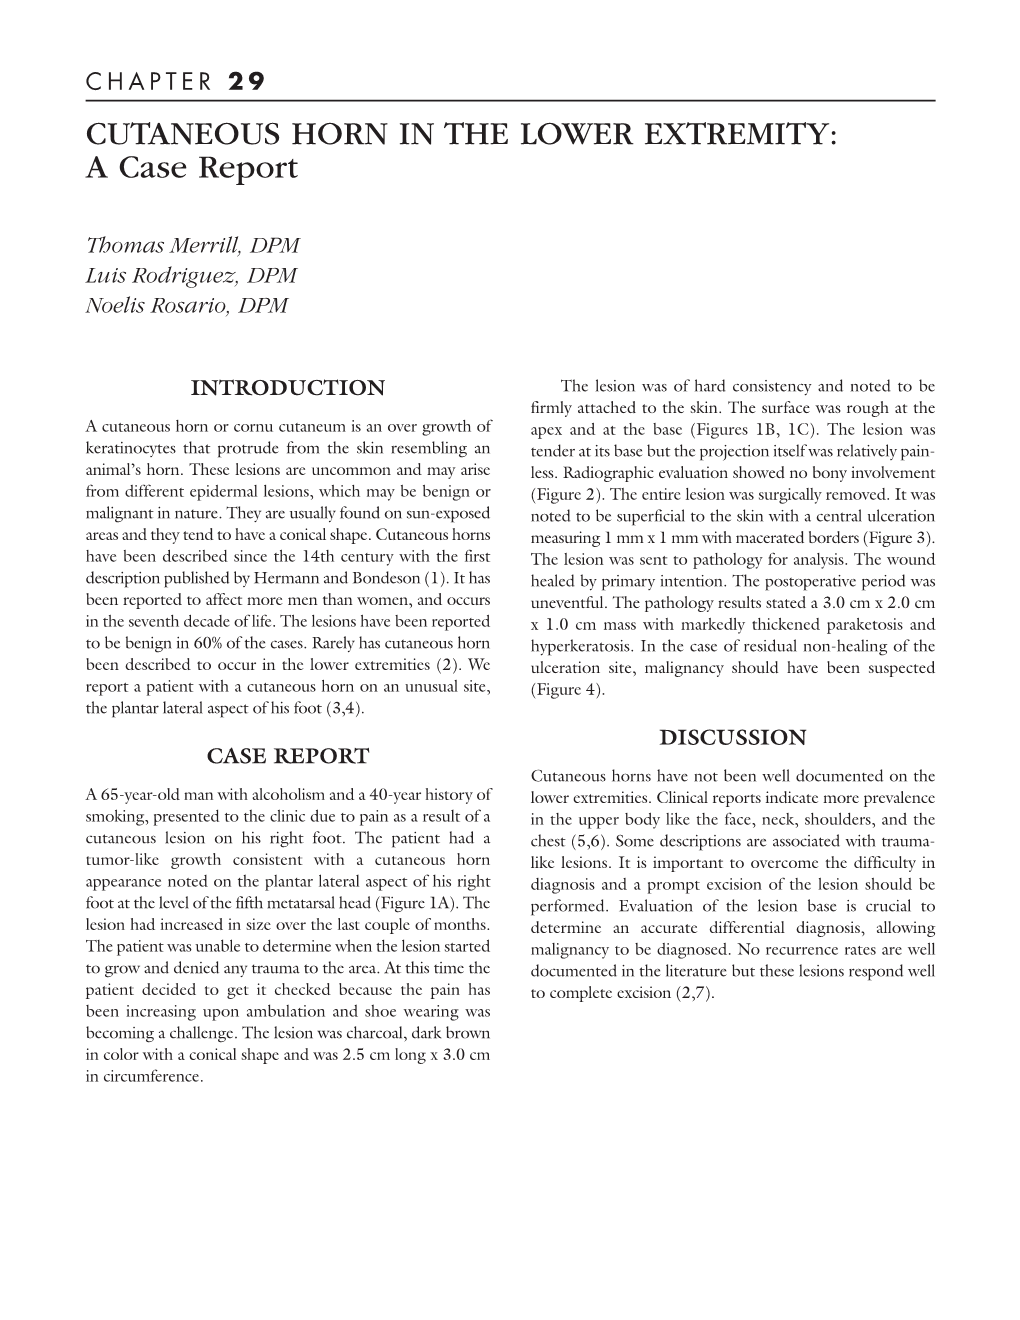 CUTANEOUS HORN in the LOWER EXTREMITY: a Case Report